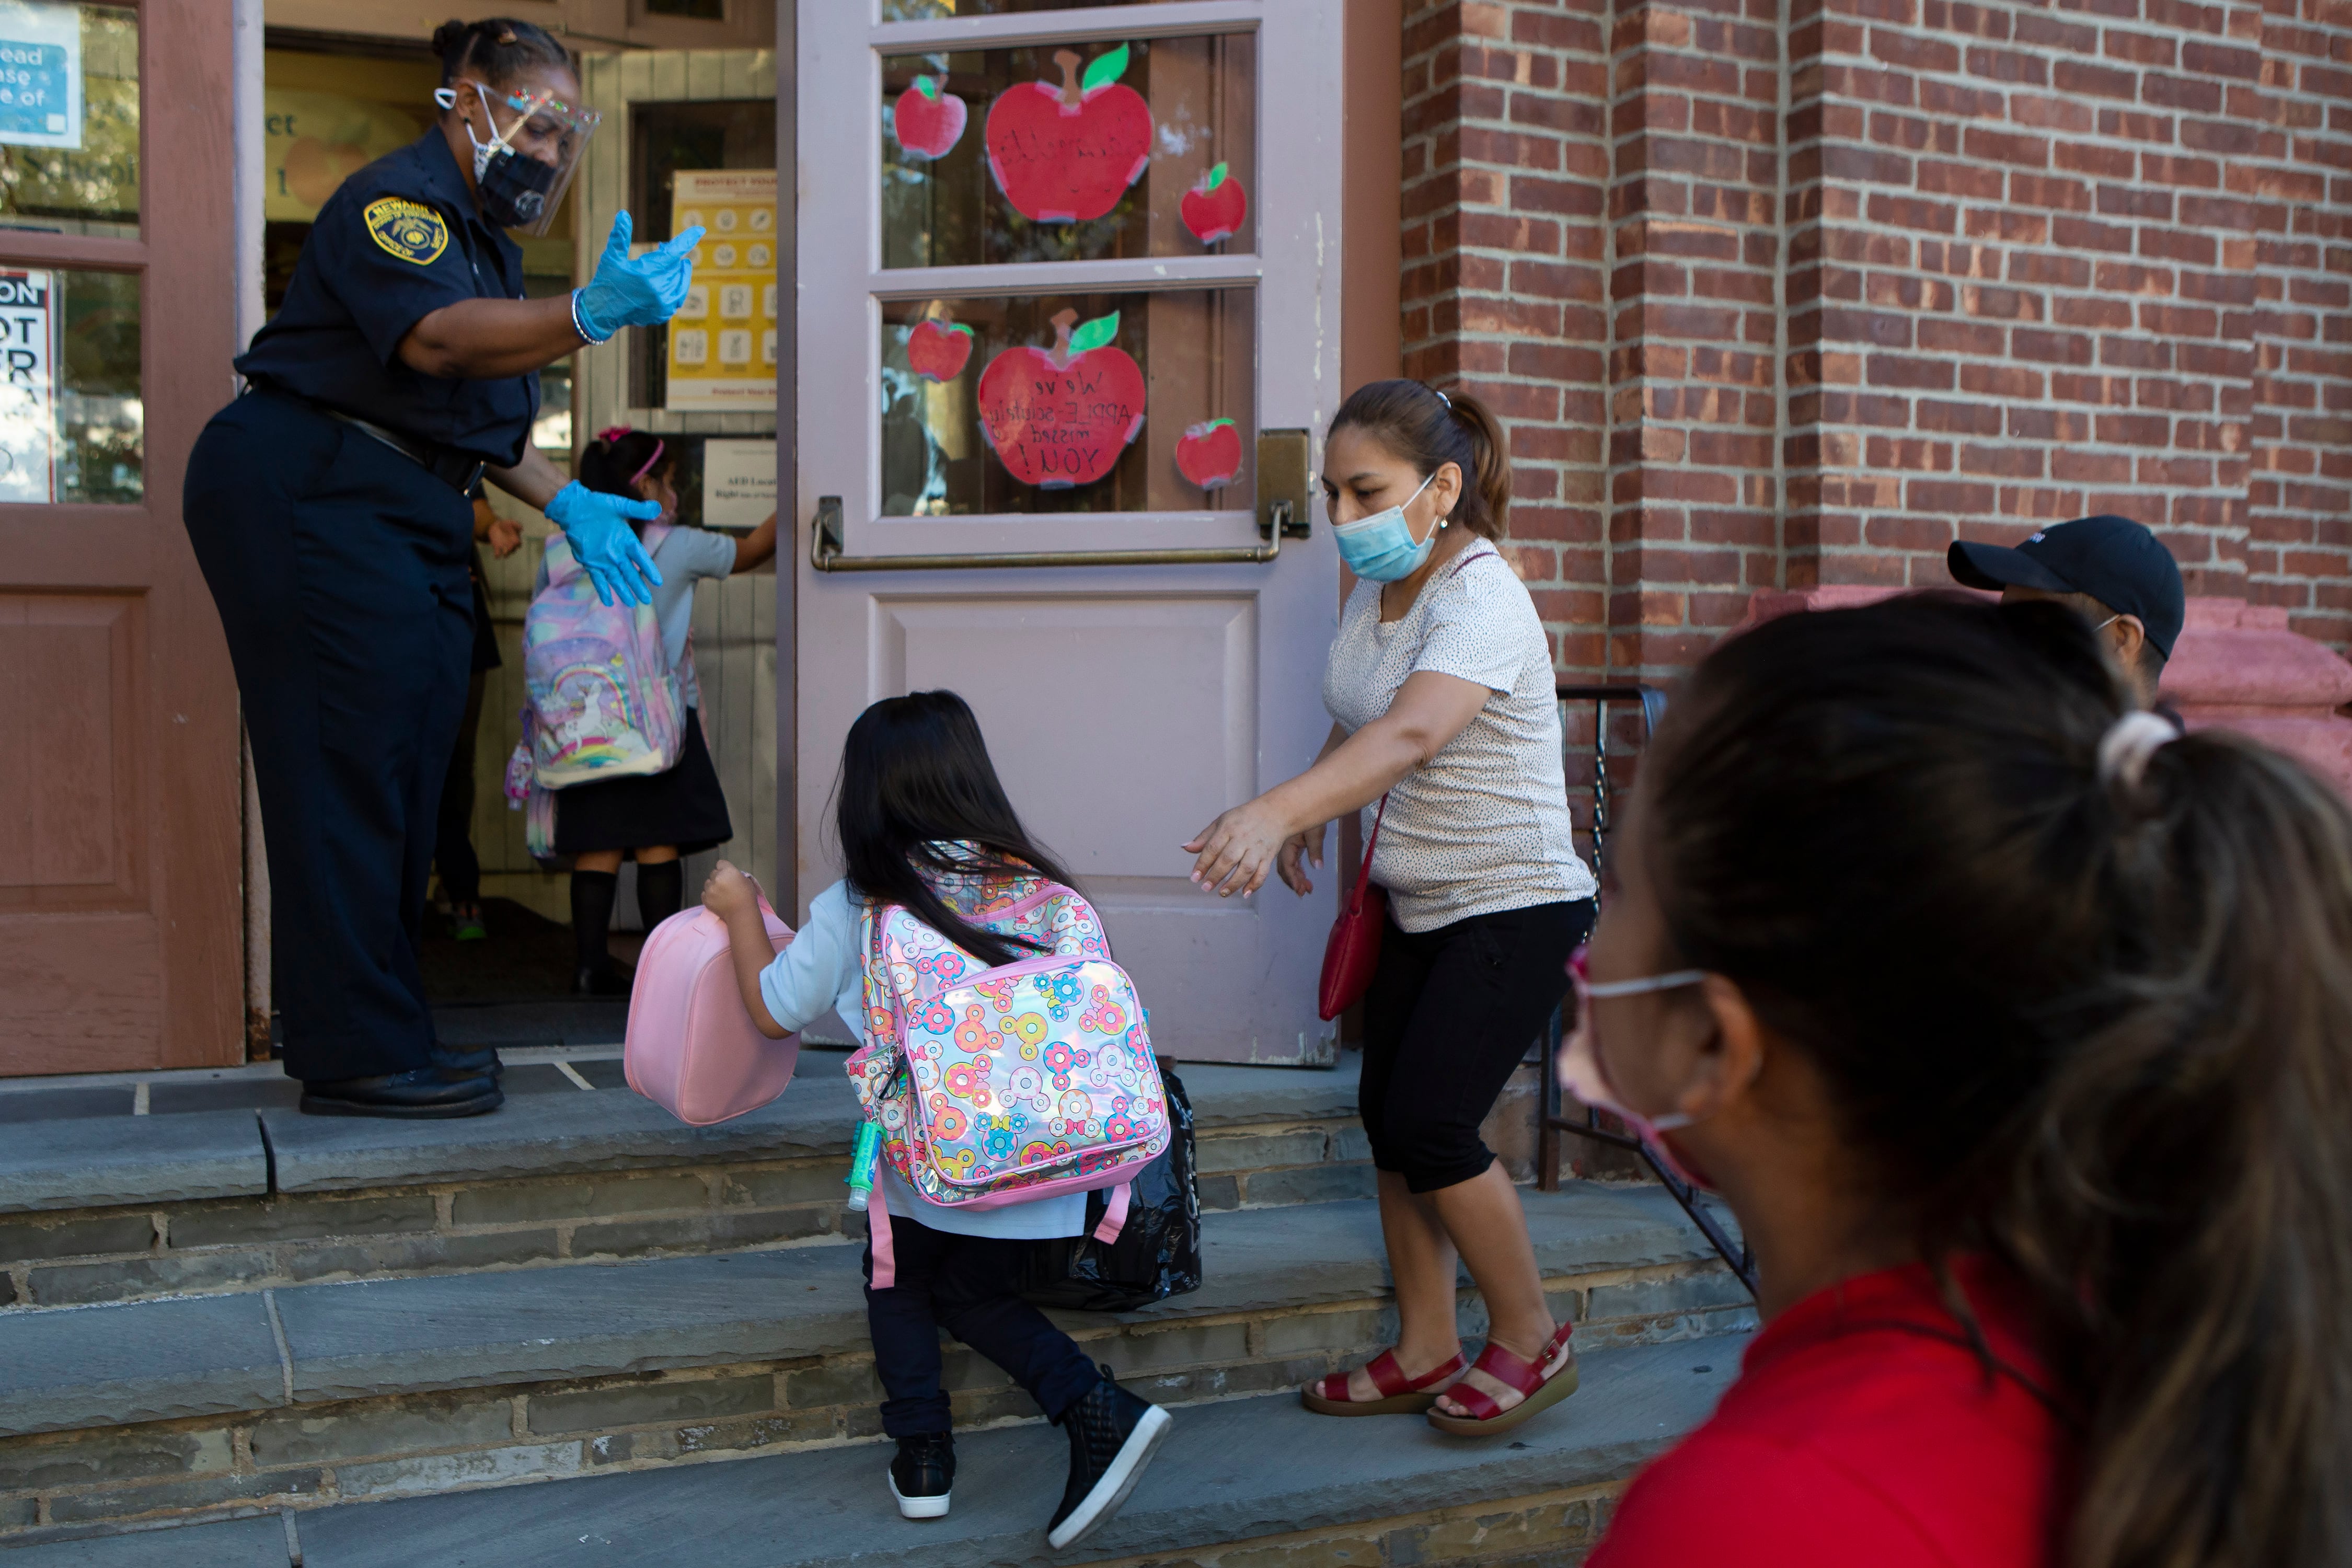 A school resource officer leads students into Newark’s Lafayette Street School on the first day of classes.